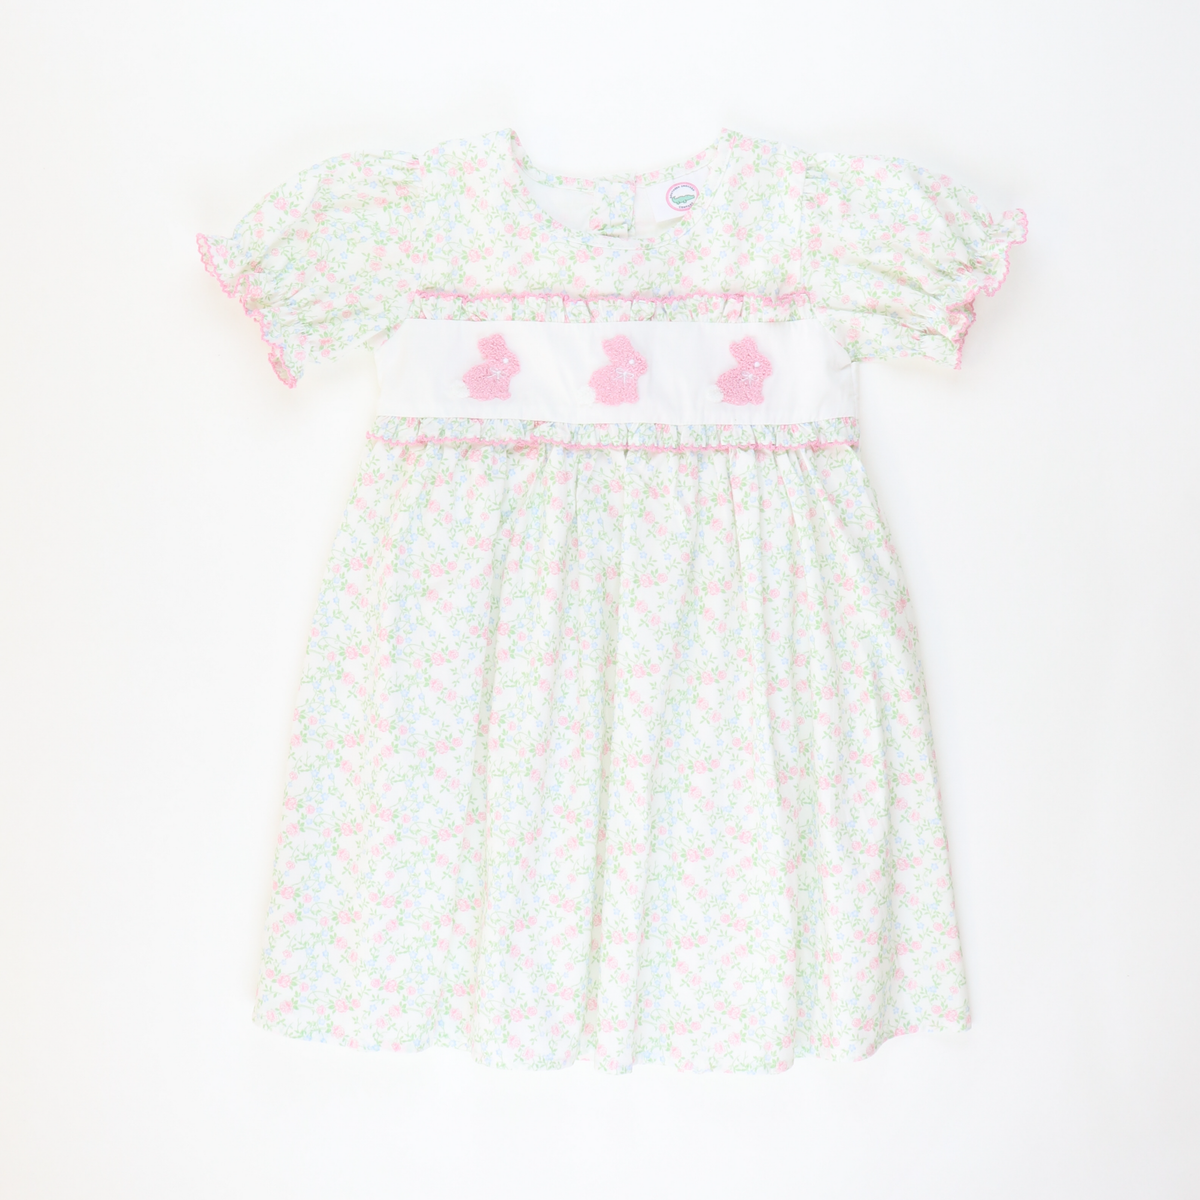 Embroidered Bunnies Dress - Pink & Blue Floral